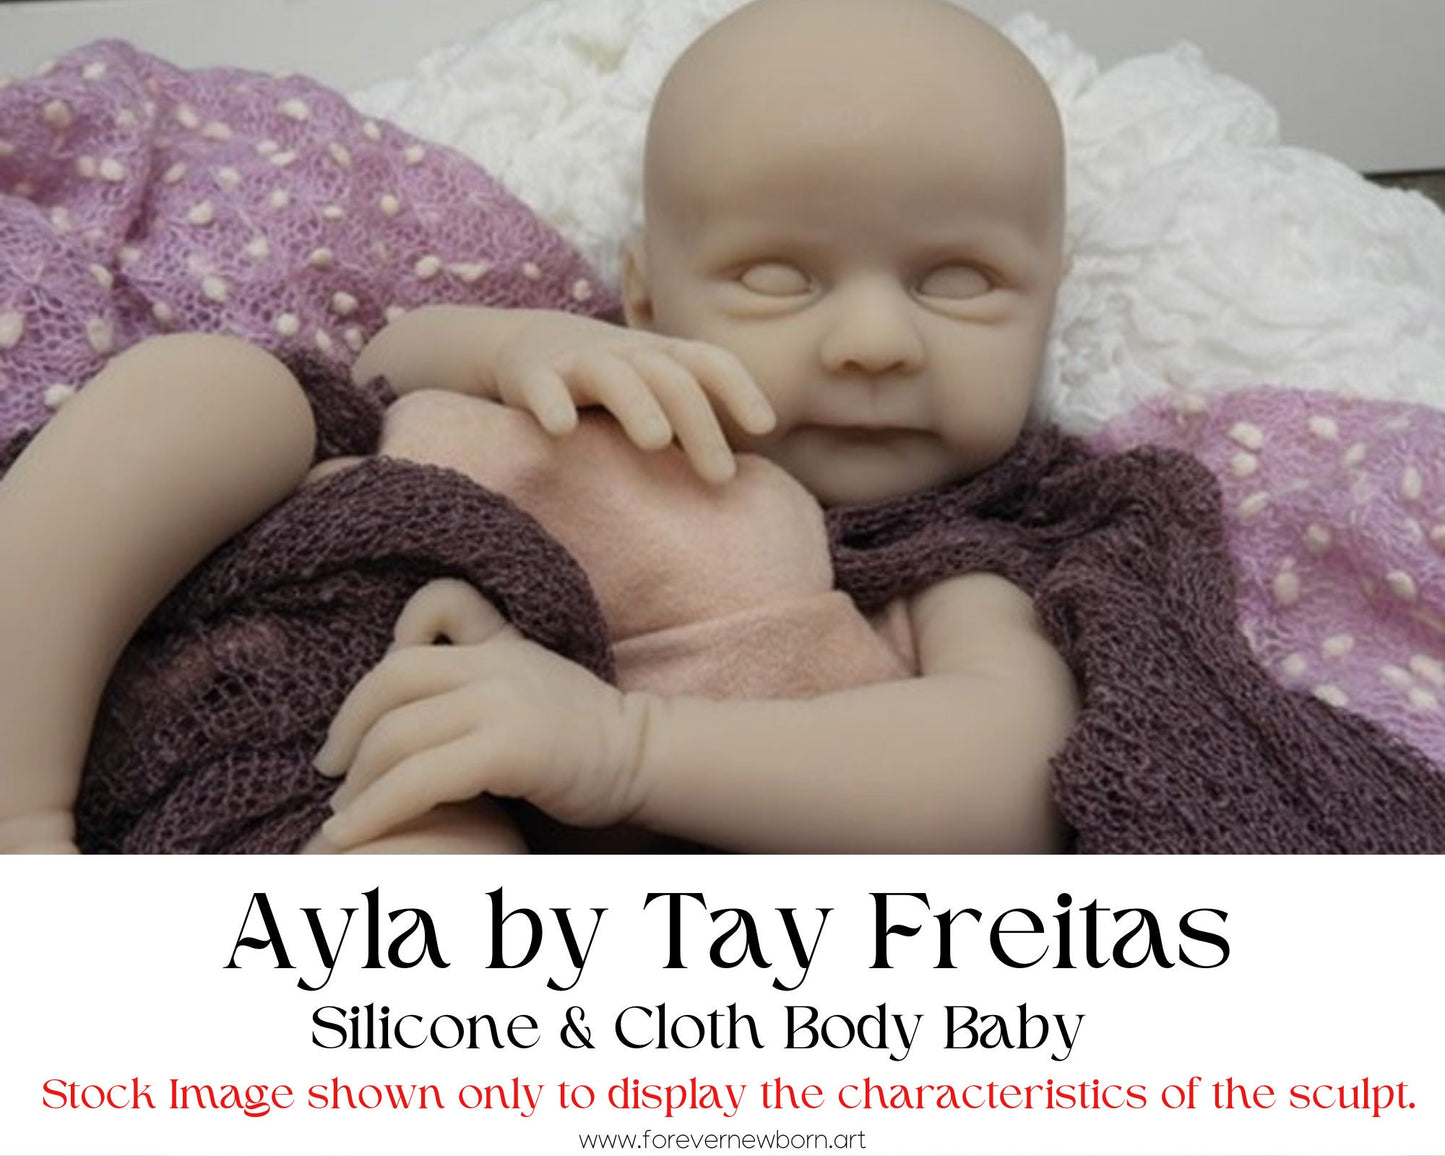 SiLiCoNe BaBy Ayla by Tay Freitas (16"+ Full Limbs) with cloth body. Extended Processing Time May Be Required. ASK FIRST!